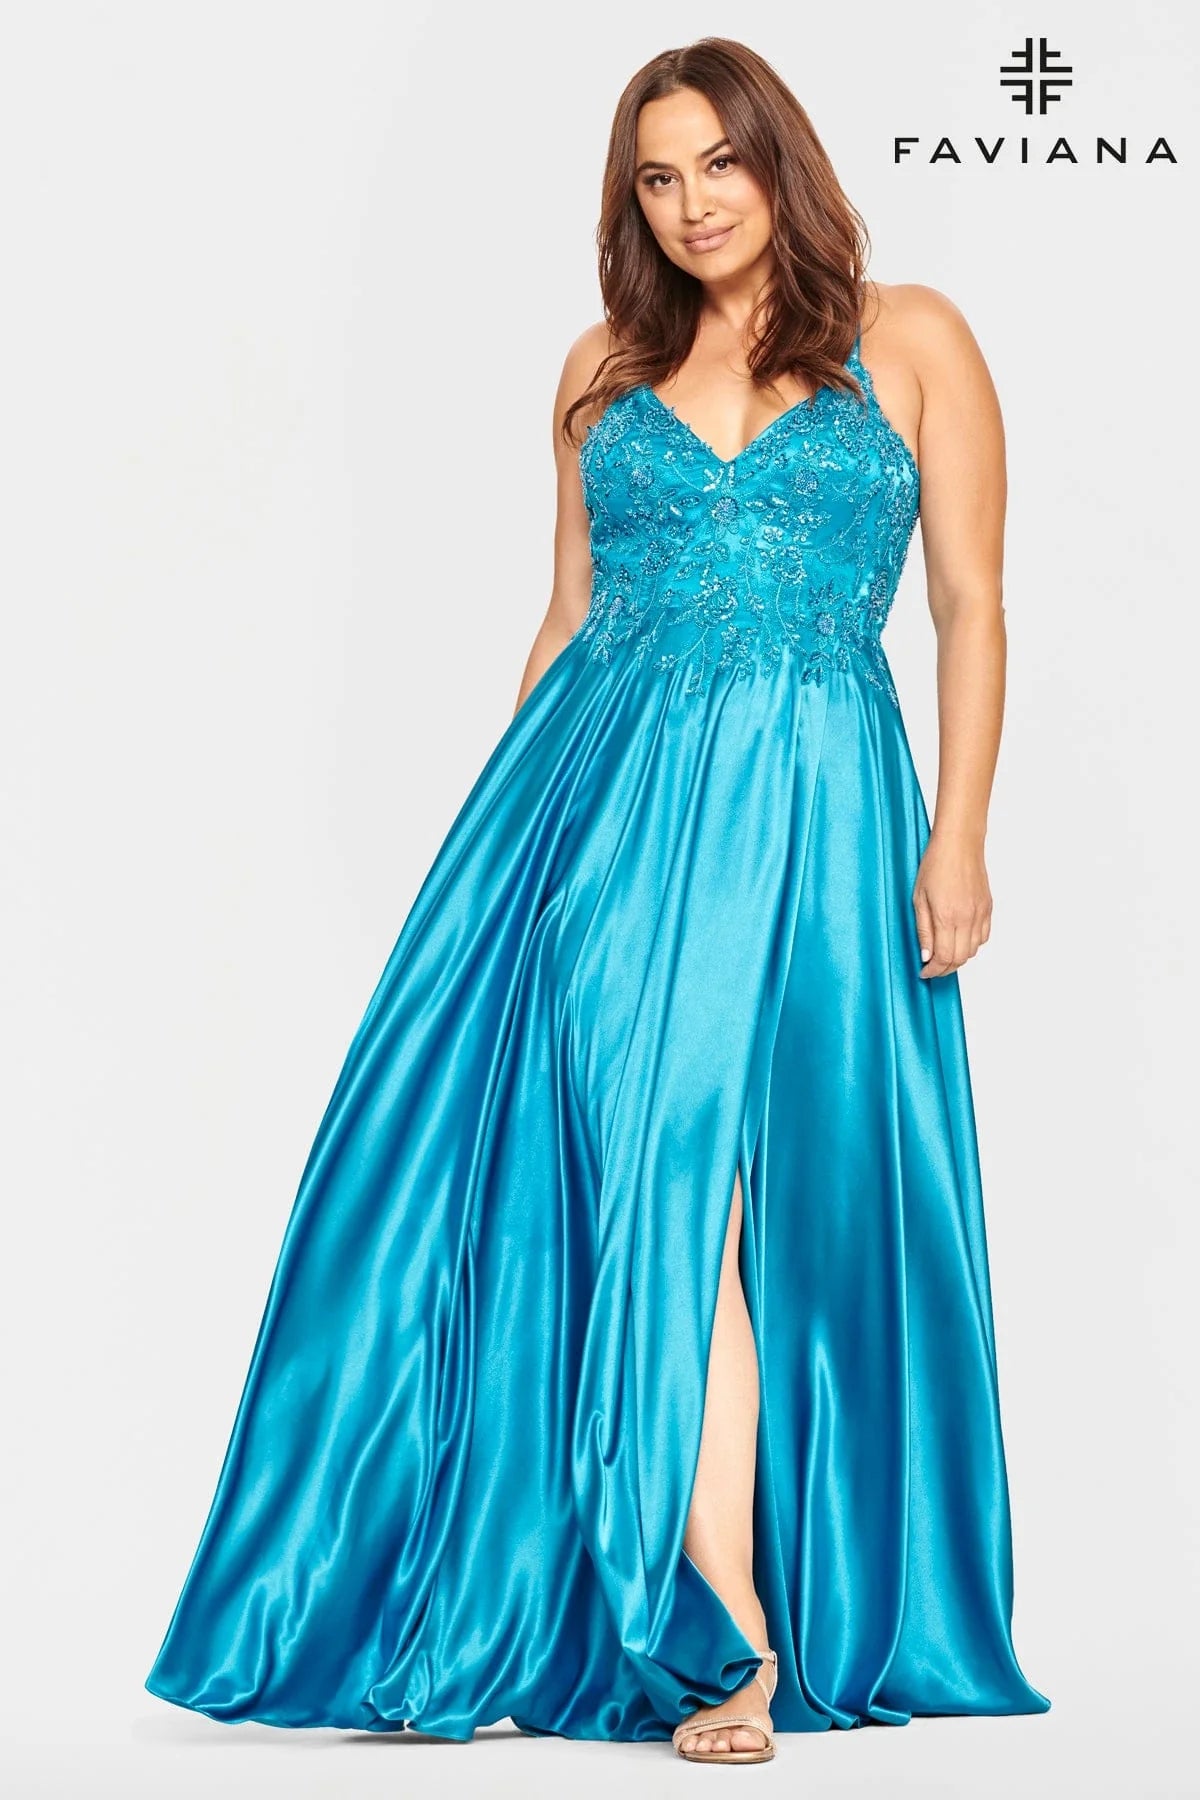 Faviana Plus Size Gown style 9533 – The Winged Monkey